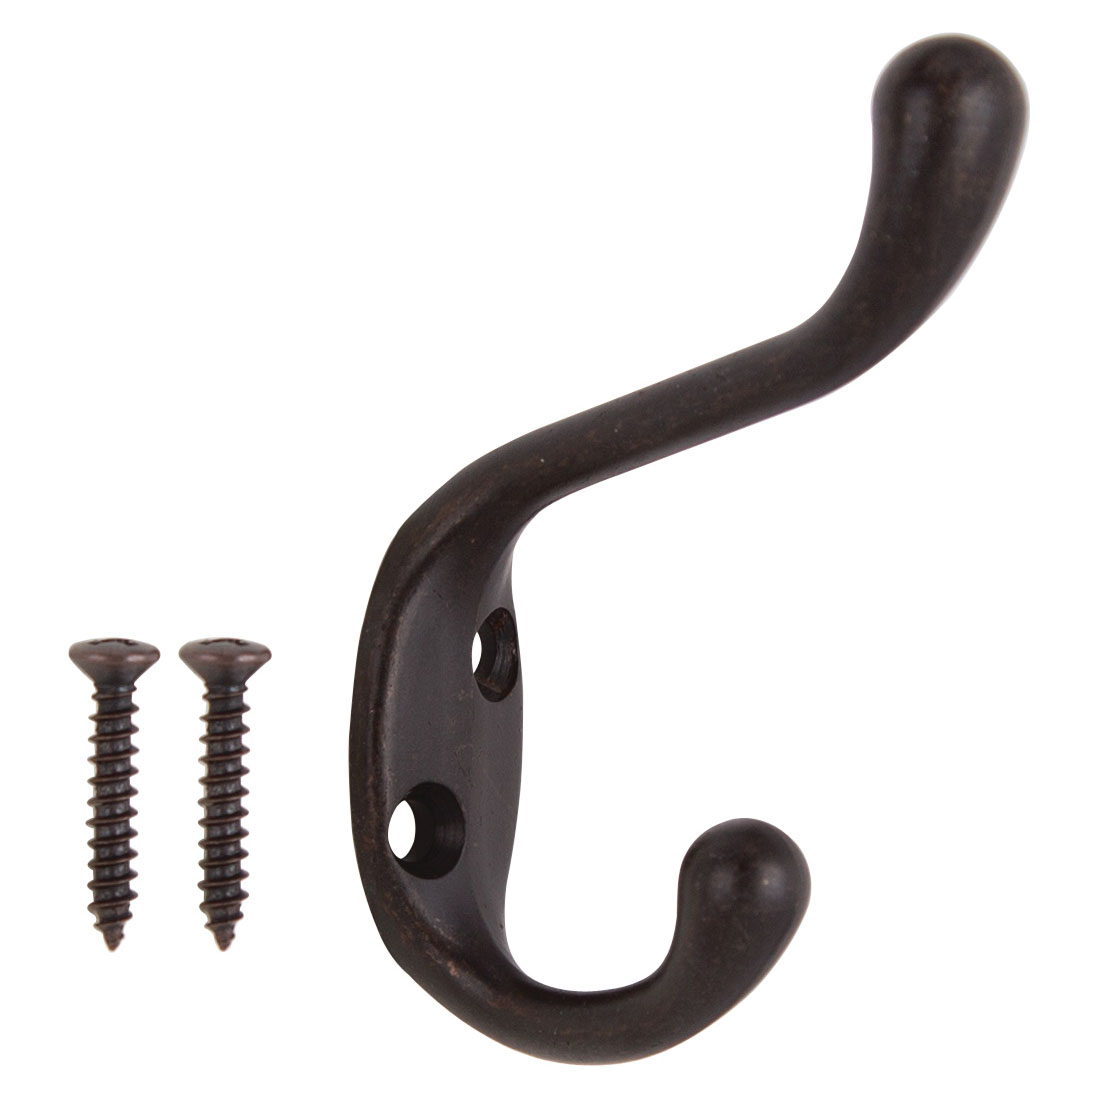 H6271007ORB-PS Coat and Hat Hook, 22 lb, 2-Hook, 1-1/64 in Opening, Zinc, Oil-Rubbed Bronze